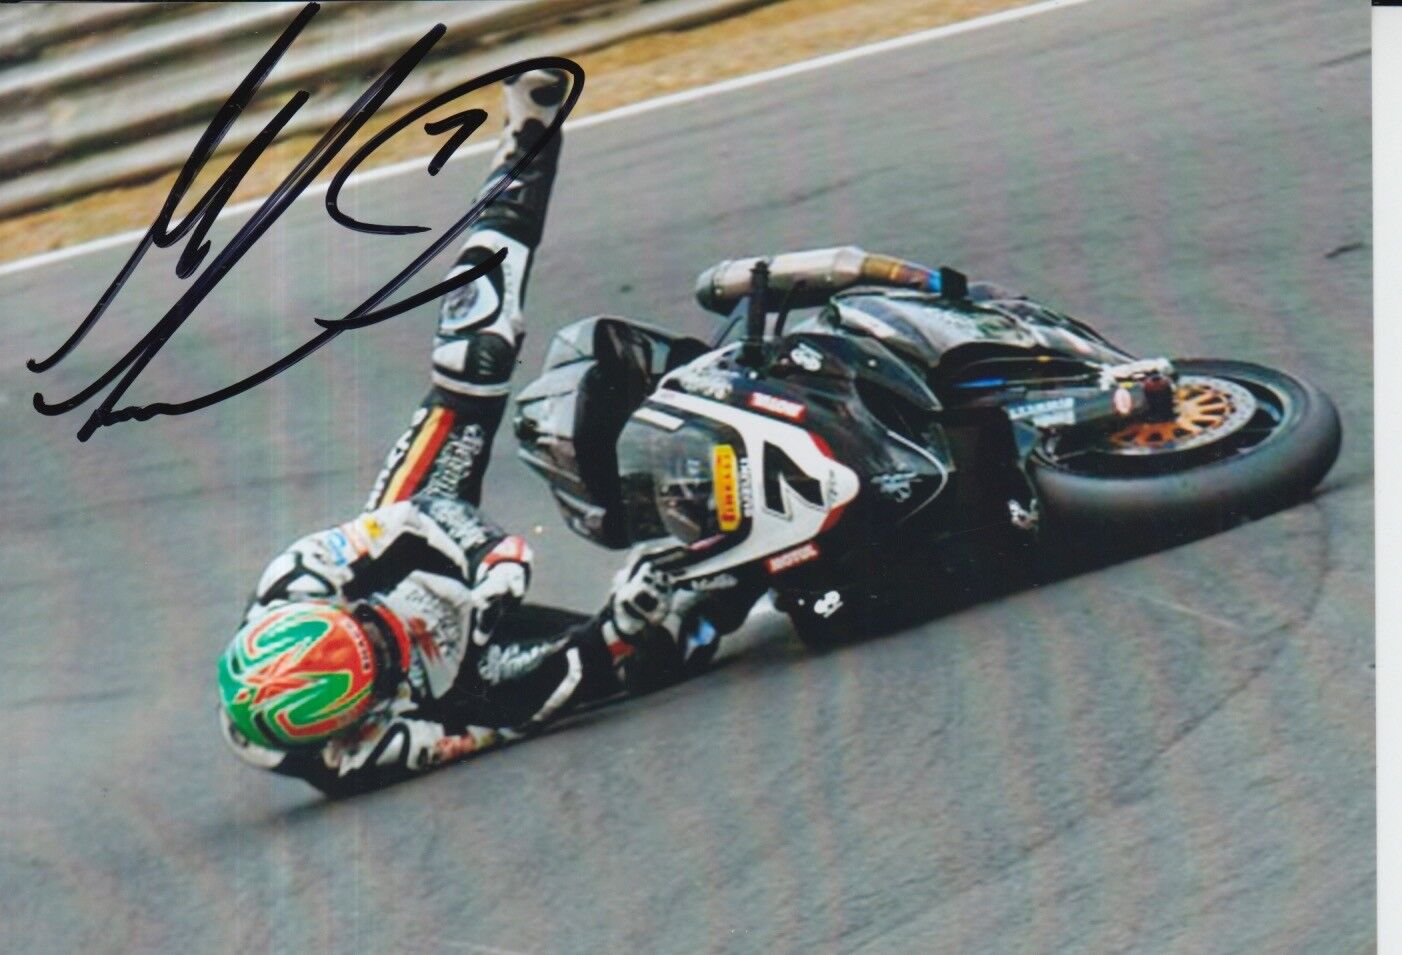 Michael Laverty Hand Signed 7x5 Photo Poster painting BSB, MotoGP, WSBK 21.